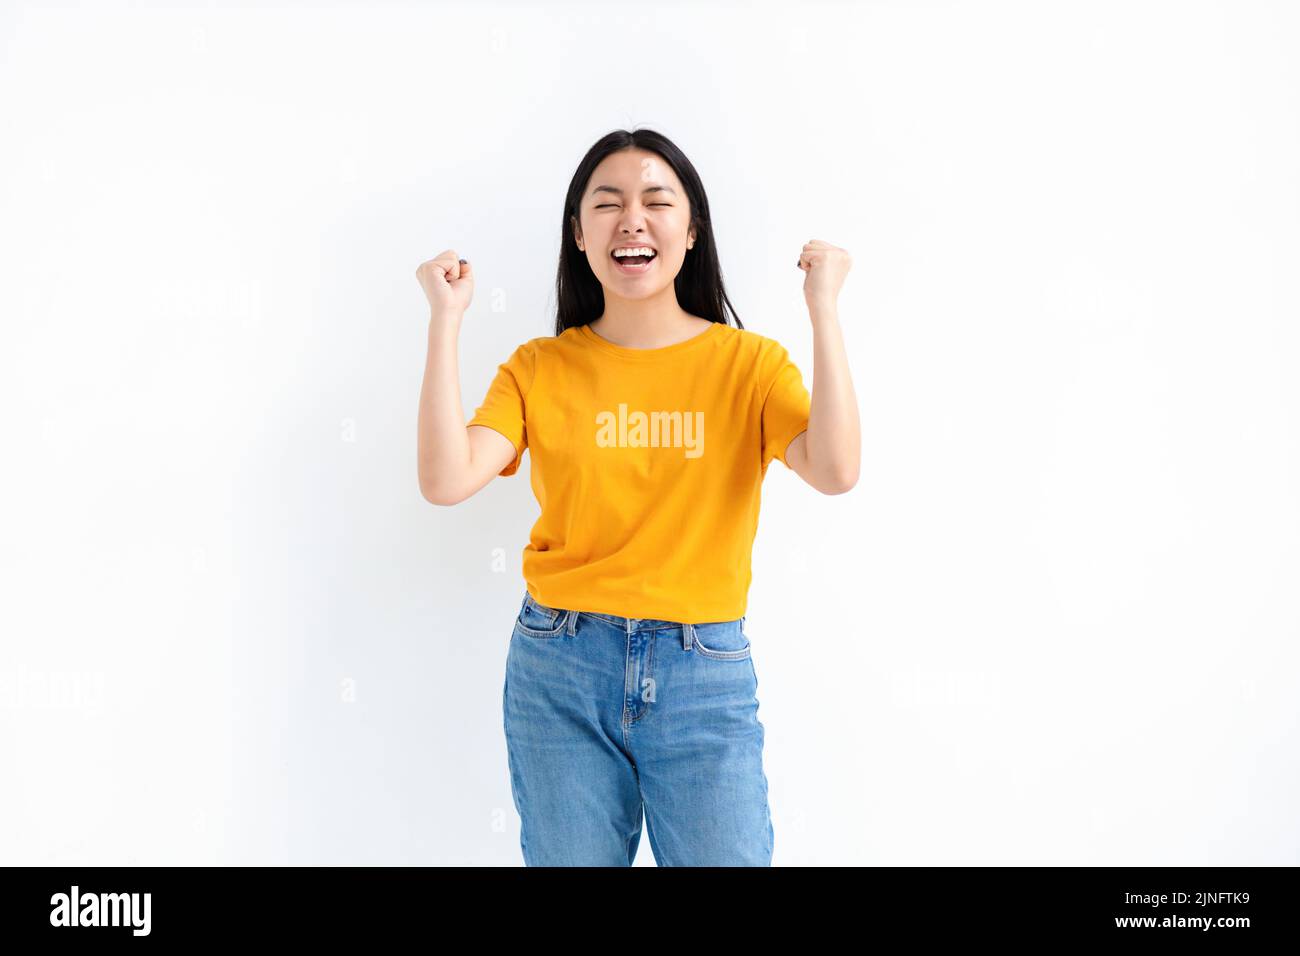 Joyful Asian woman rejoicing say yes looking happy and celebrating victory standing over white background Stock Photo